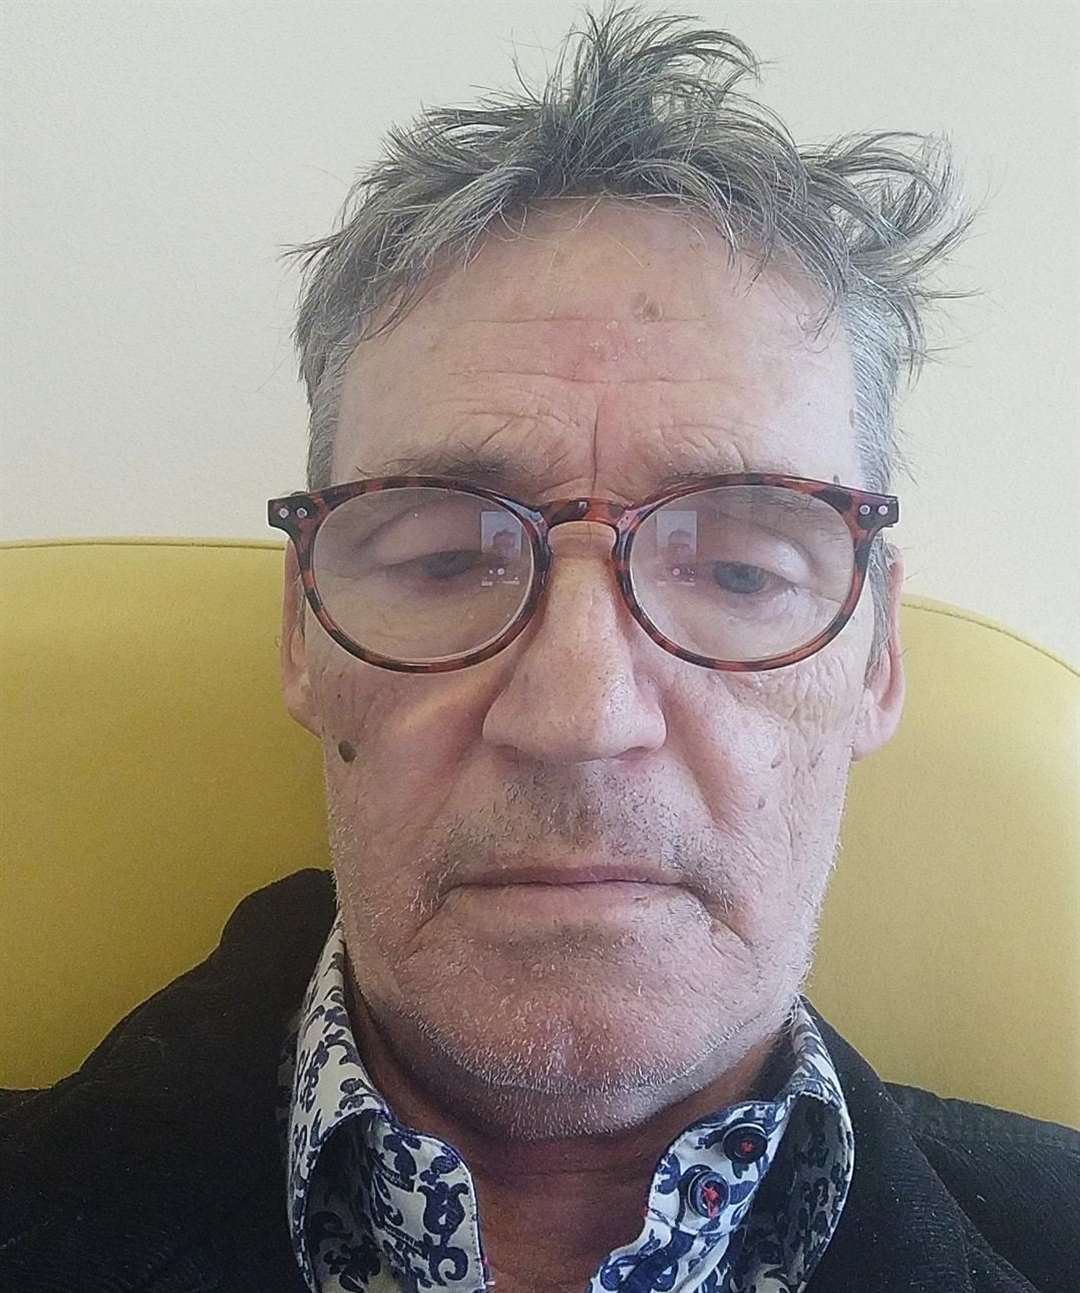 The 66-year-old lived in High Wycombe